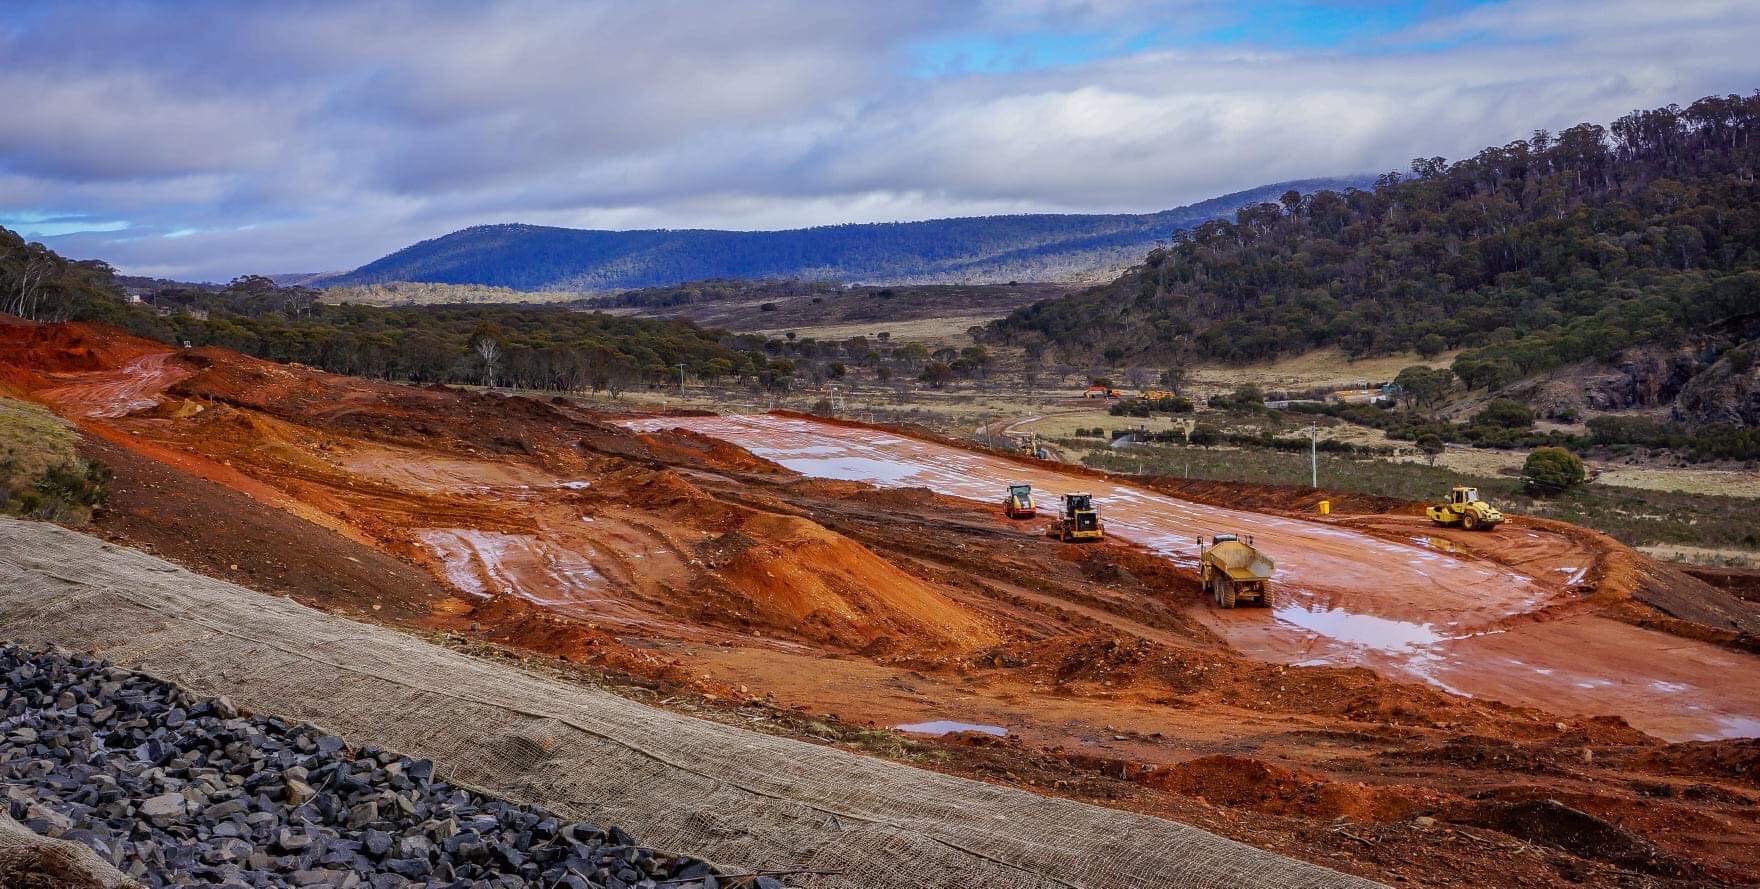 Locals claim Snowy Mountains construction causing terrible destruction